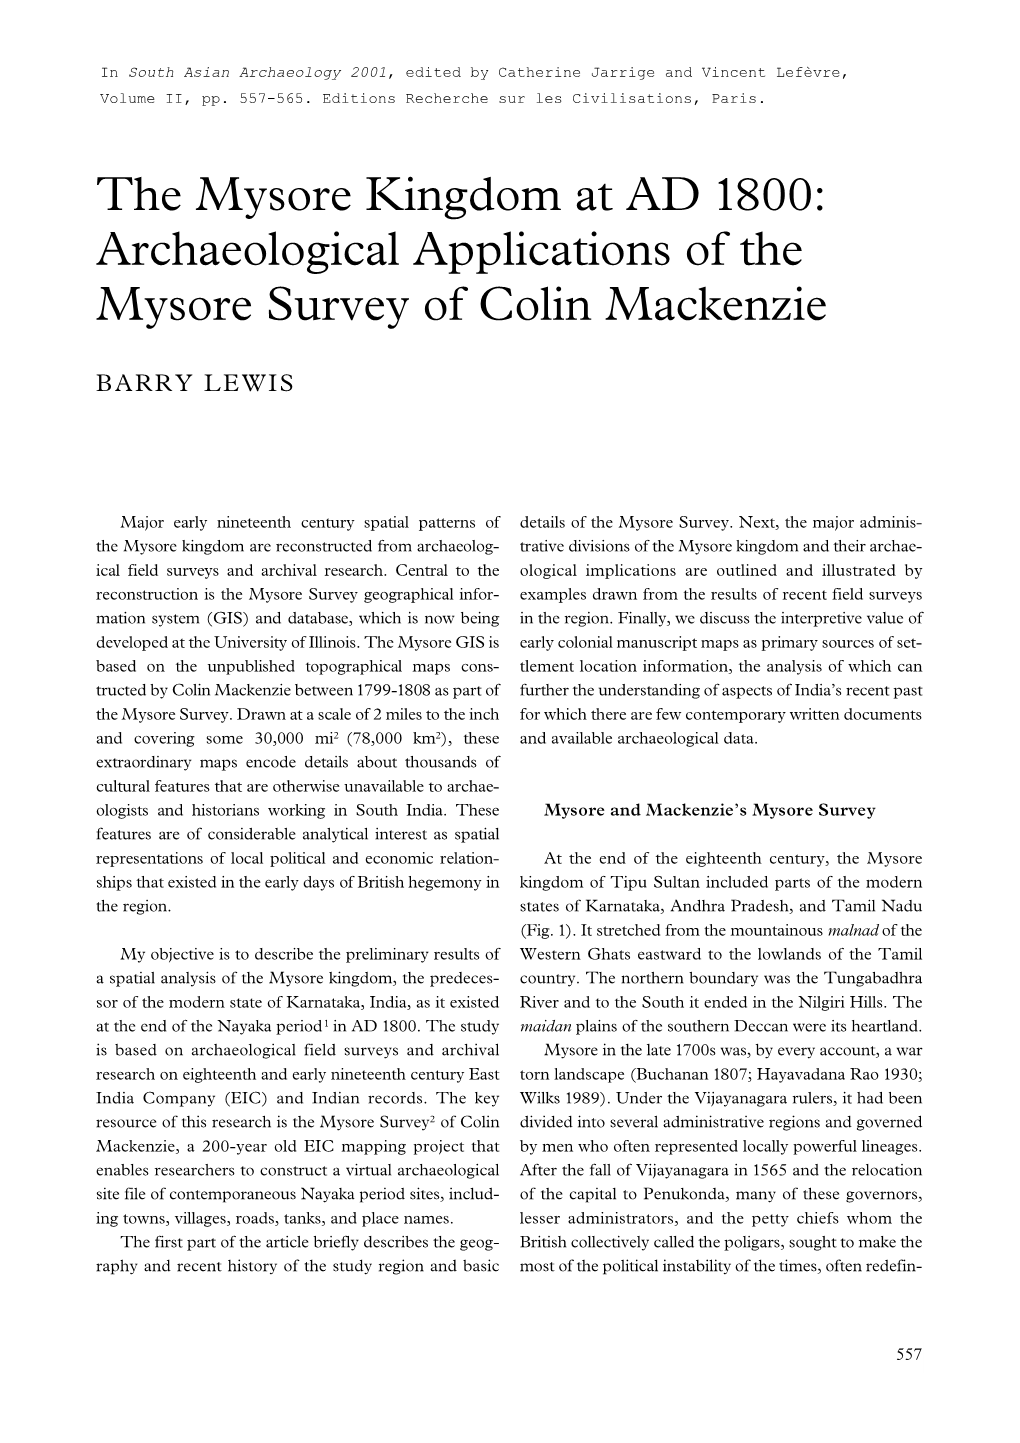 Archaeological Applications of the Mysore Survey of Colin Mackenzie